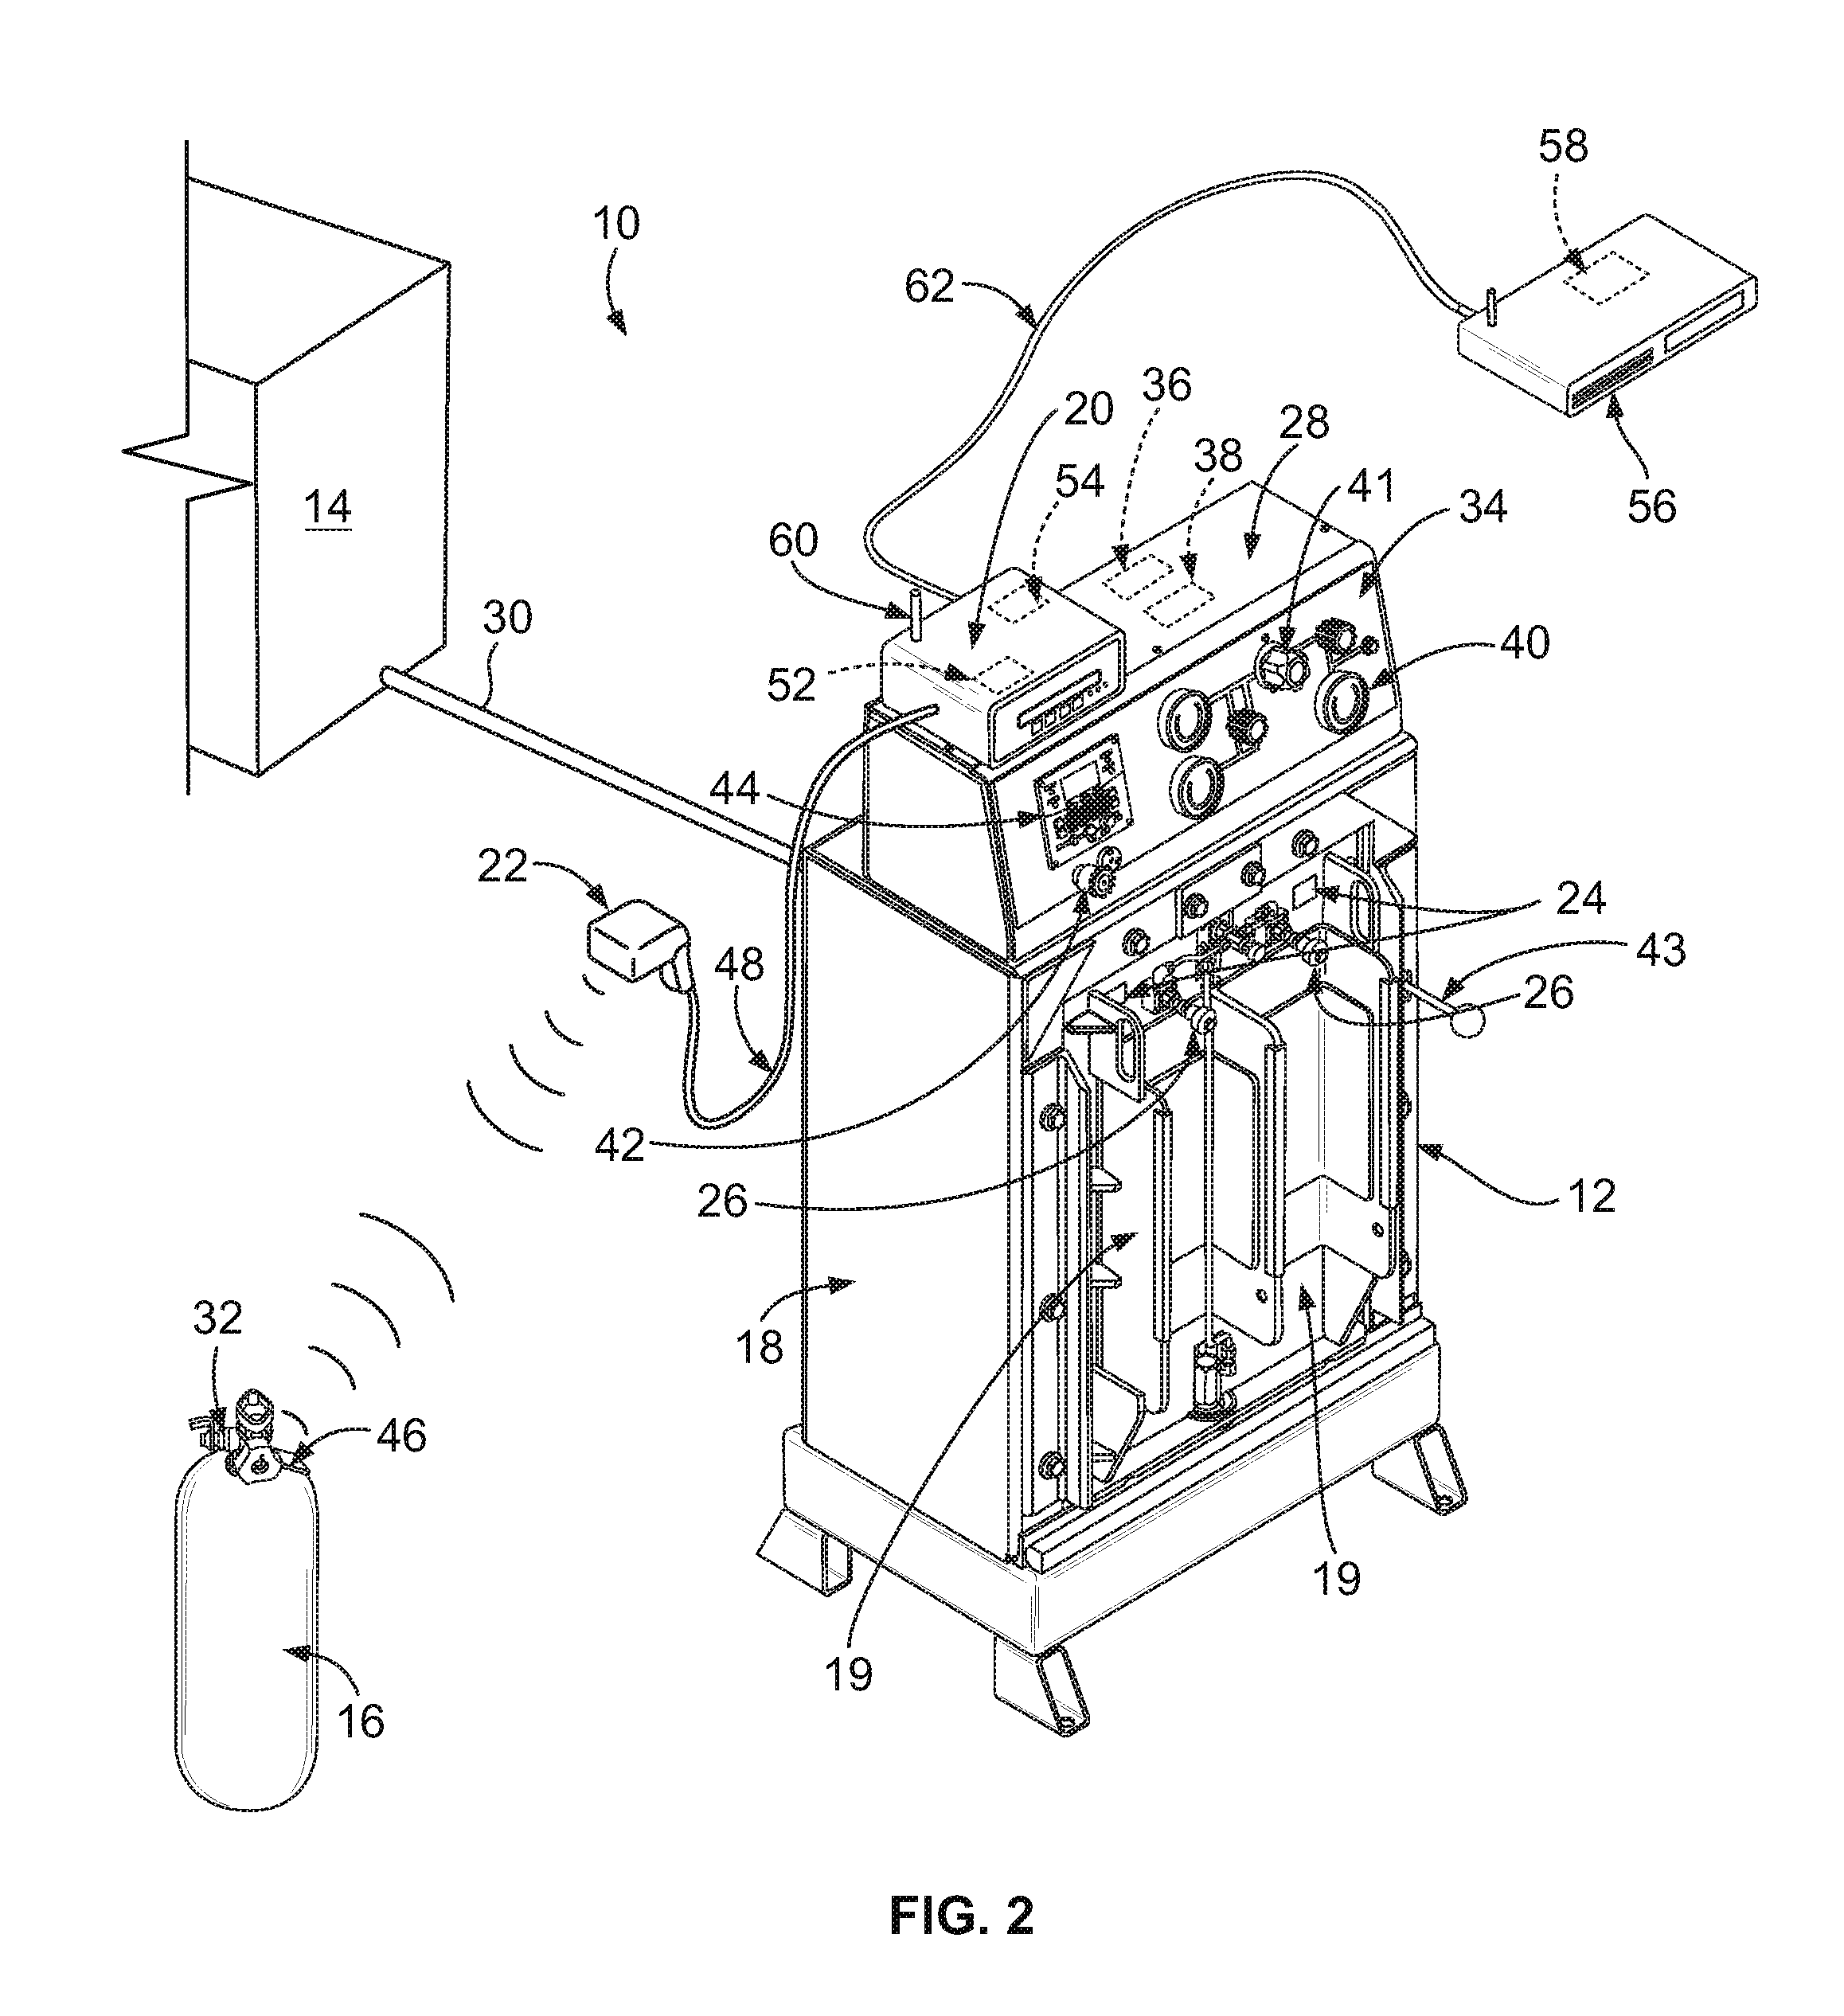 Method and system for filling a gas cylinder